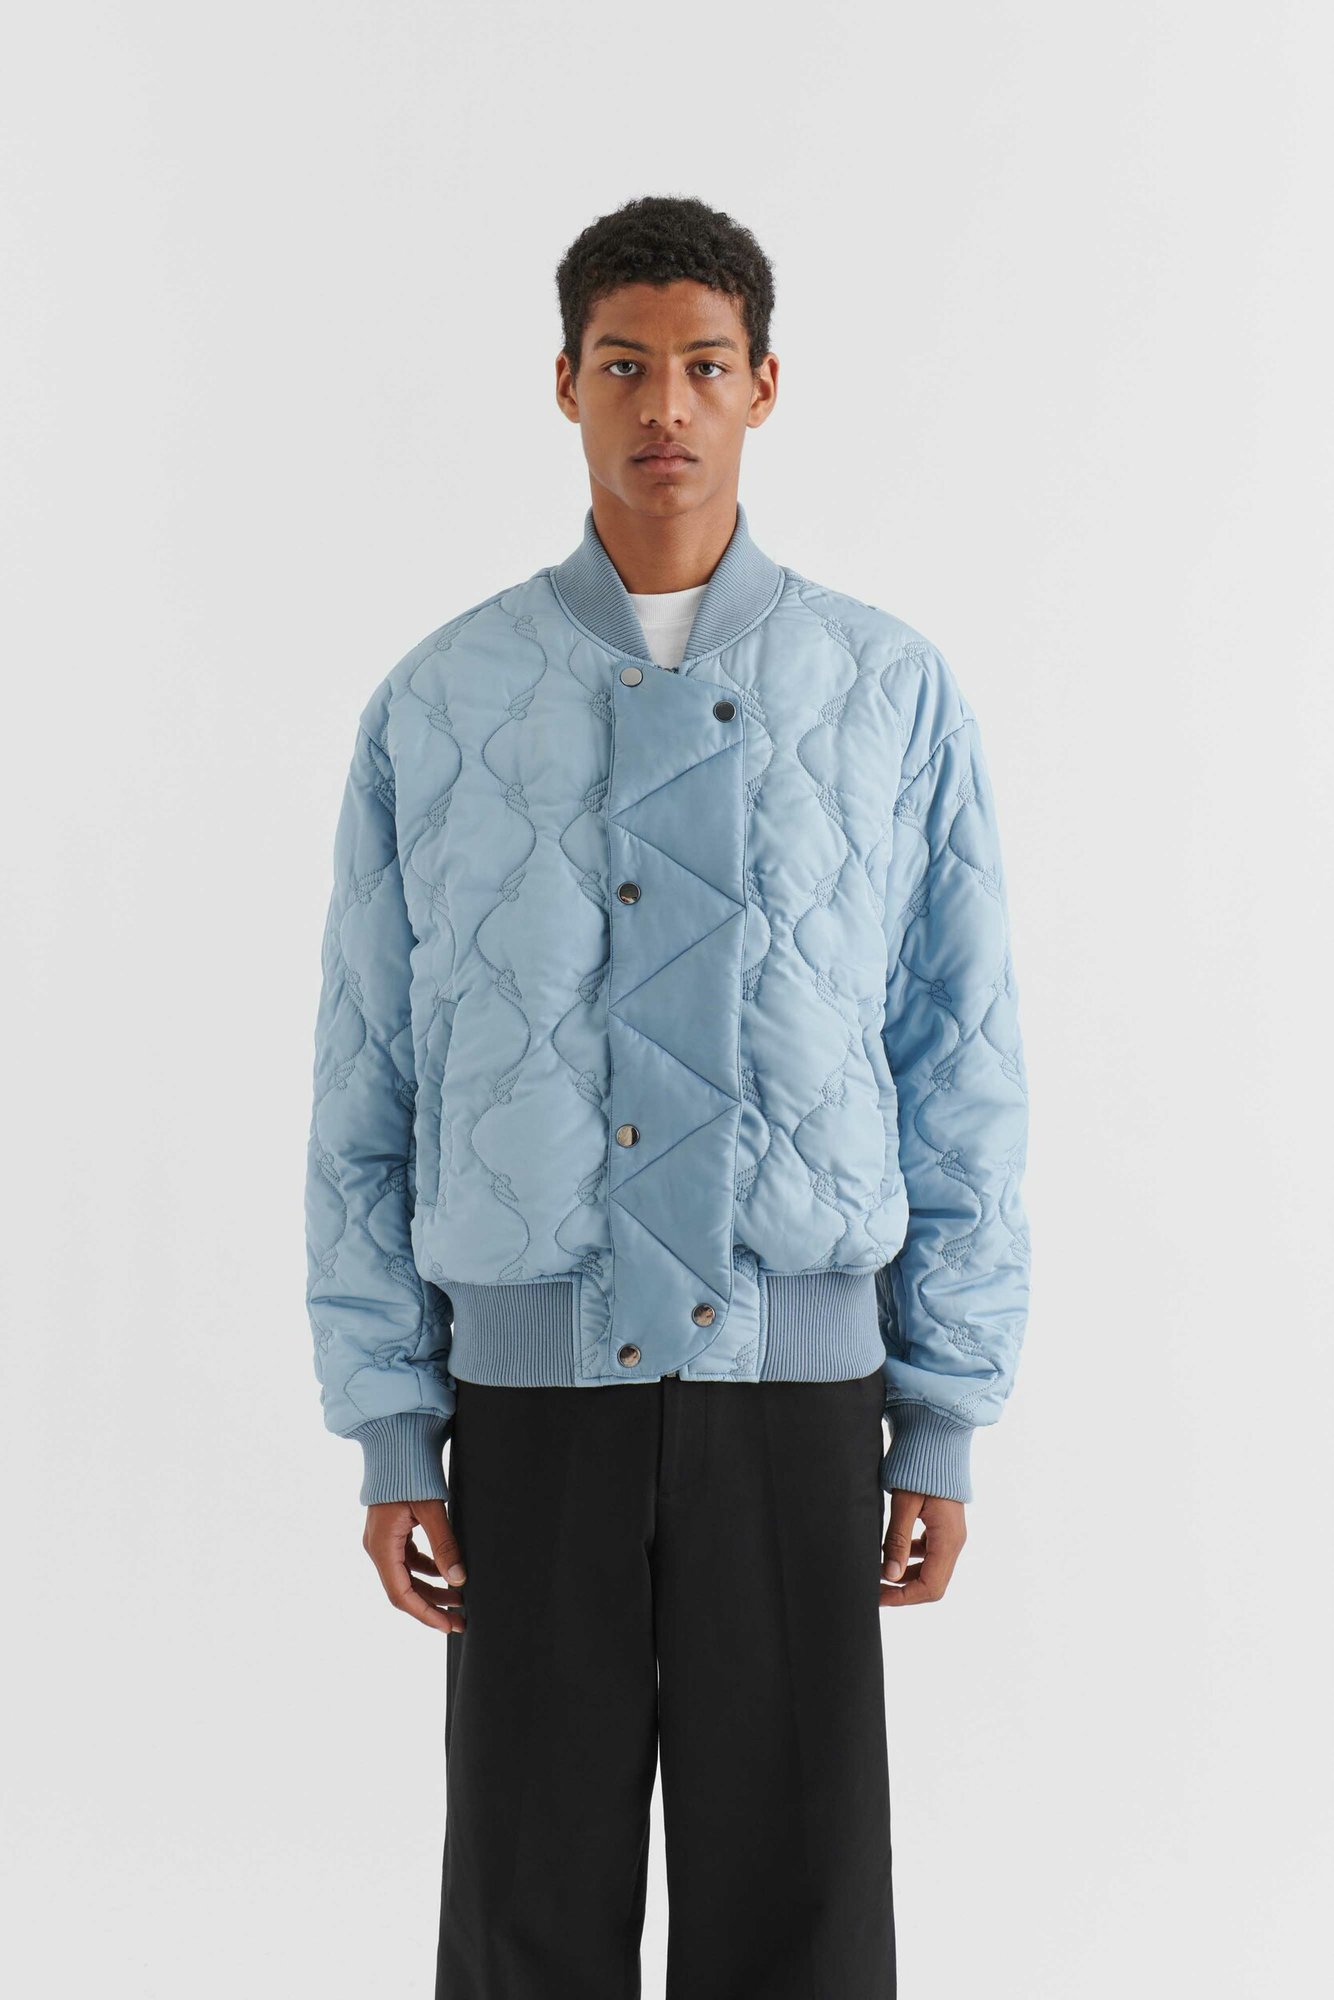 AXEL ARIGATO Annex Bomber Jacket in Bleached Blue XL